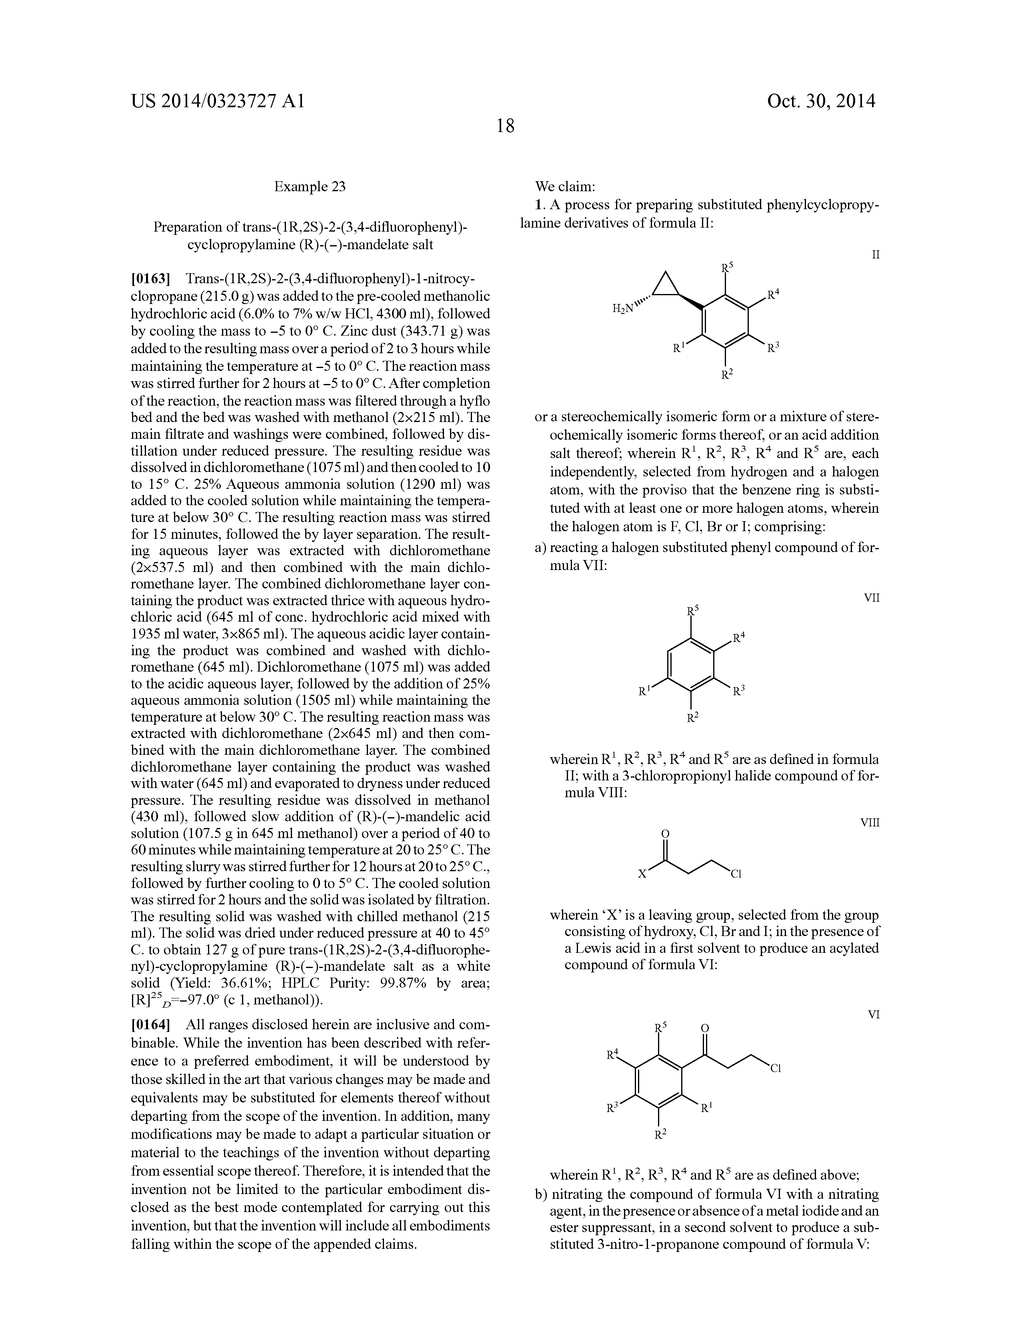 NOVEL PROCESS FOR PREPARING PHENYLCYCLOPROPYLAMINE DERIVATIVES USING NOVEL     INTERMEDIATES - diagram, schematic, and image 19